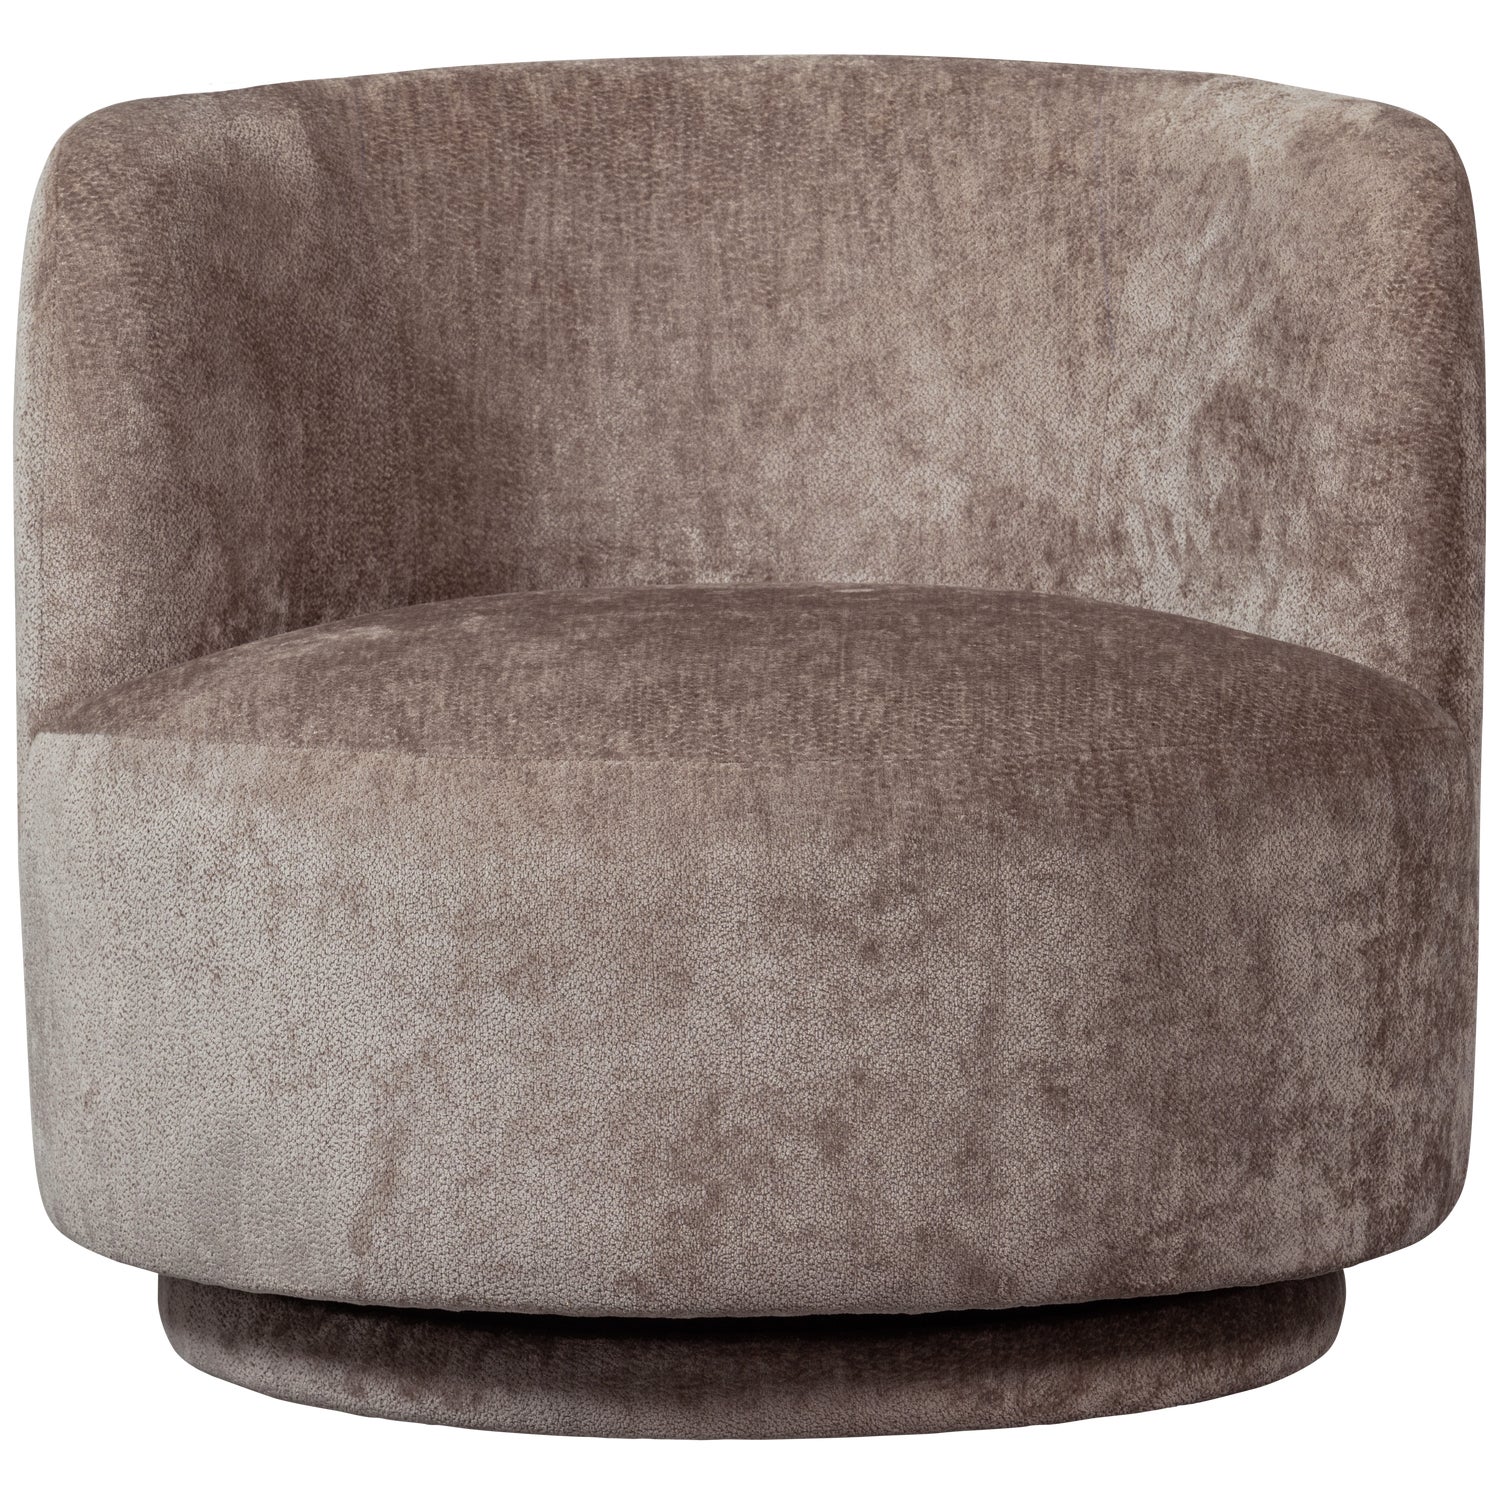 801440-T-01_VS_BP_Popular_fauteuil_taupe.png?auto=webp&format=png&width=1500&height=1500